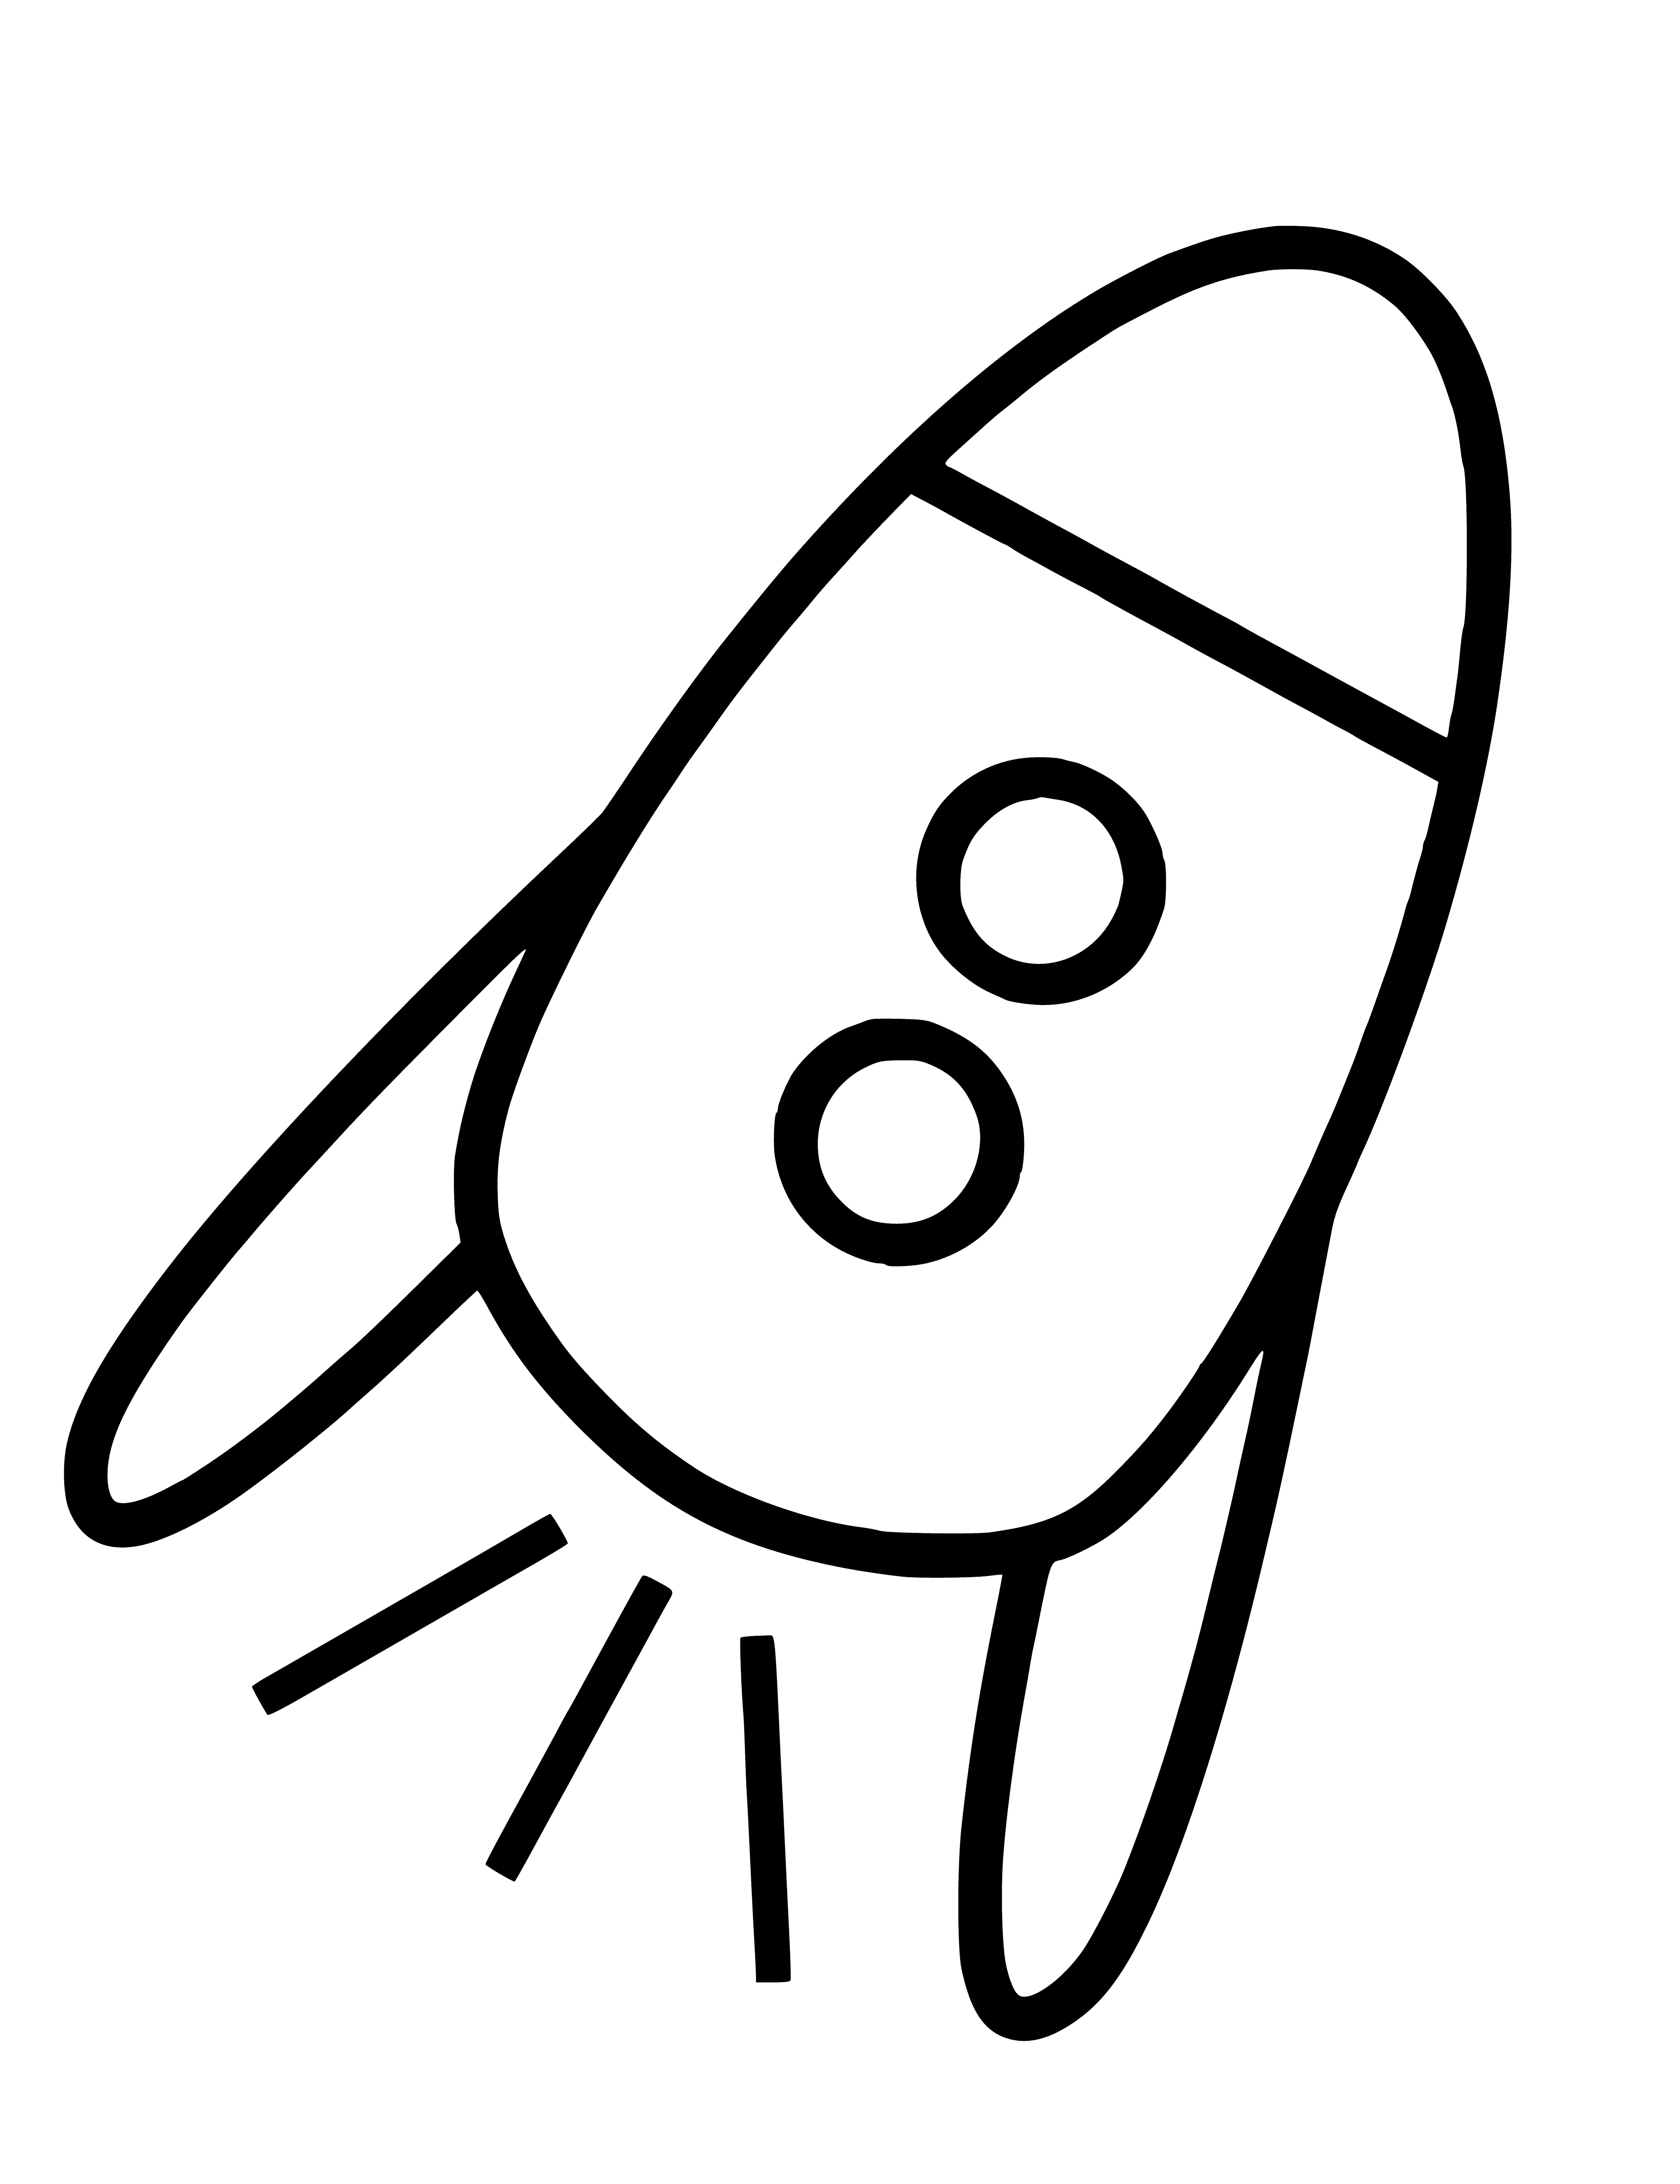 coloring page: An oversized red-white-blue rocket surrounded by stars fills the page. #rockets #stars